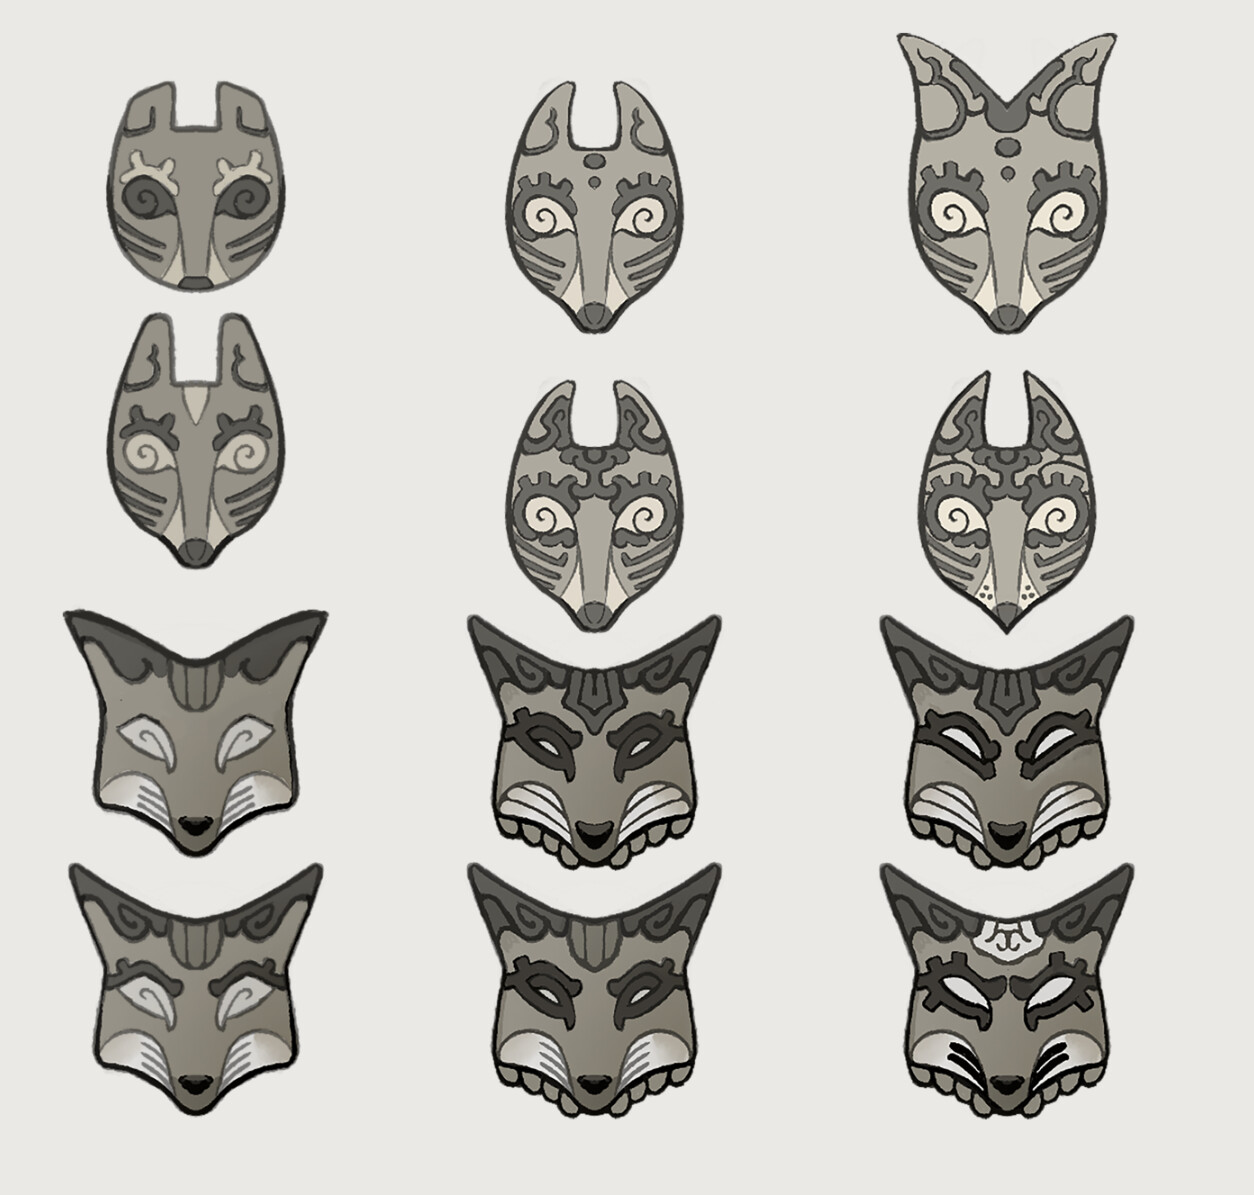 First round of mask exploration, trying to balance reading as a fox versus maya style designs.